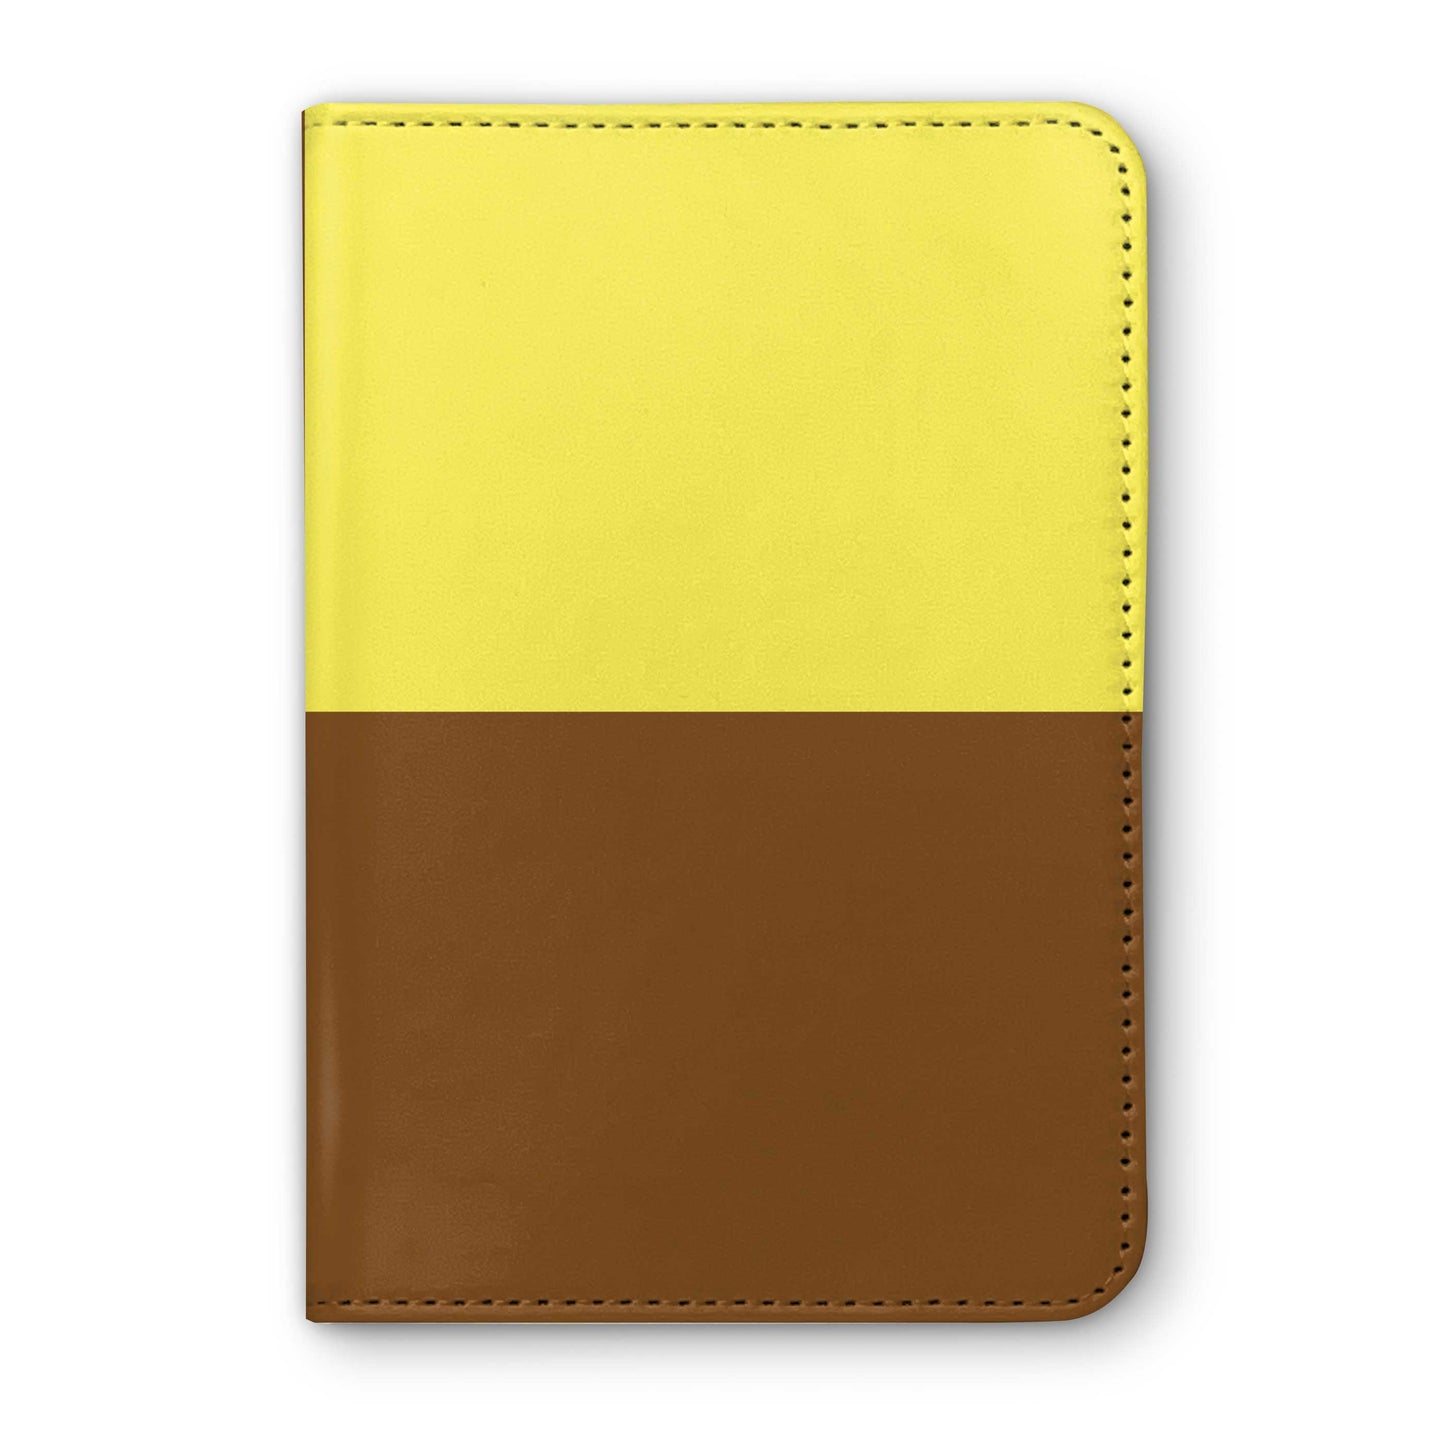 Mrs Audrey Turley Horse Racing Passport Holder - Hacked Up Horse Racing Gifts